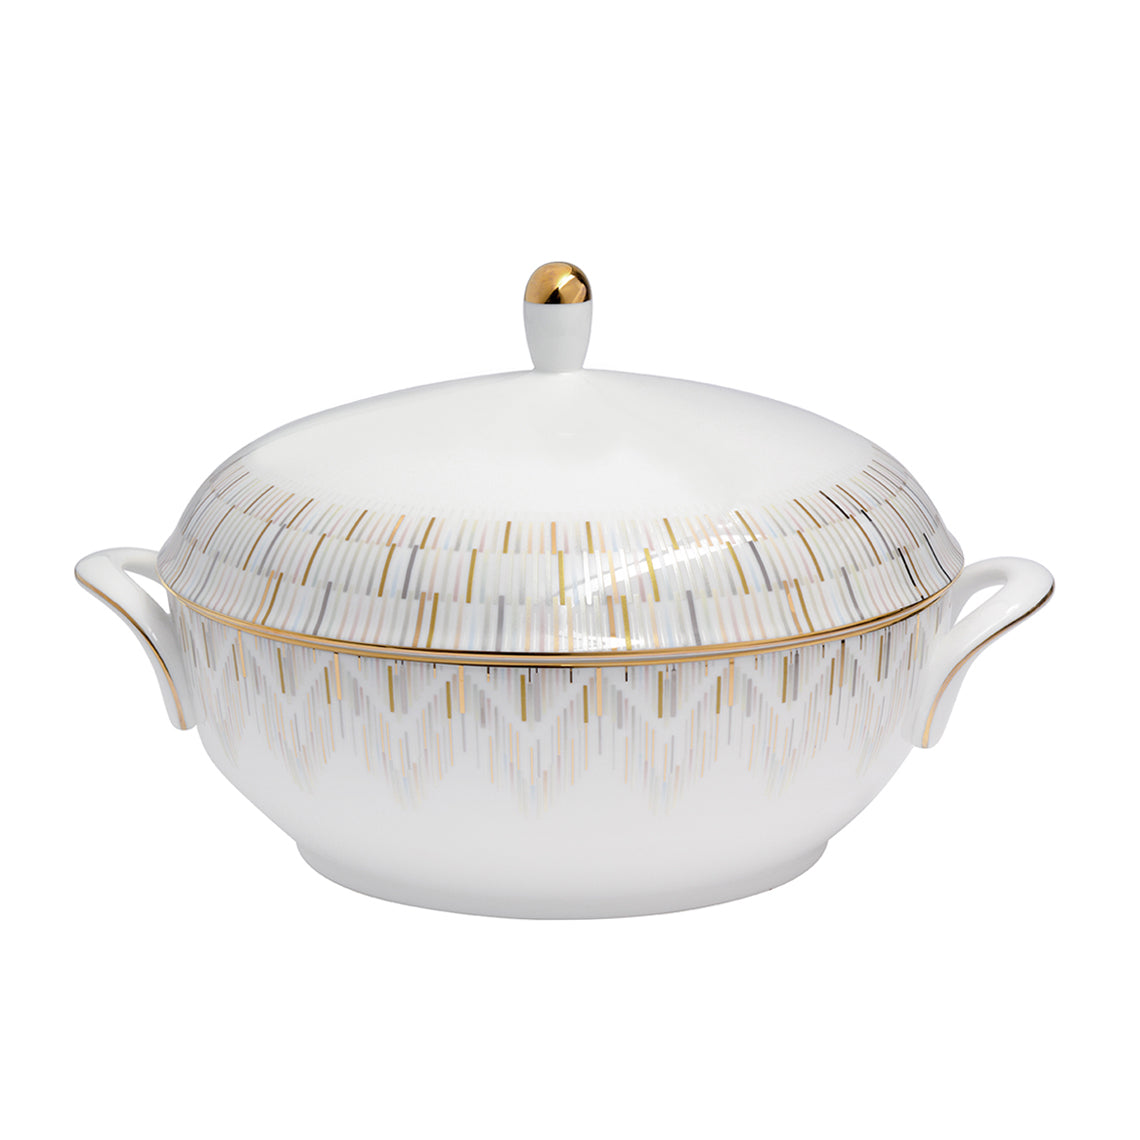 Luminous - Soup Tureen / Covered Serving Bowl